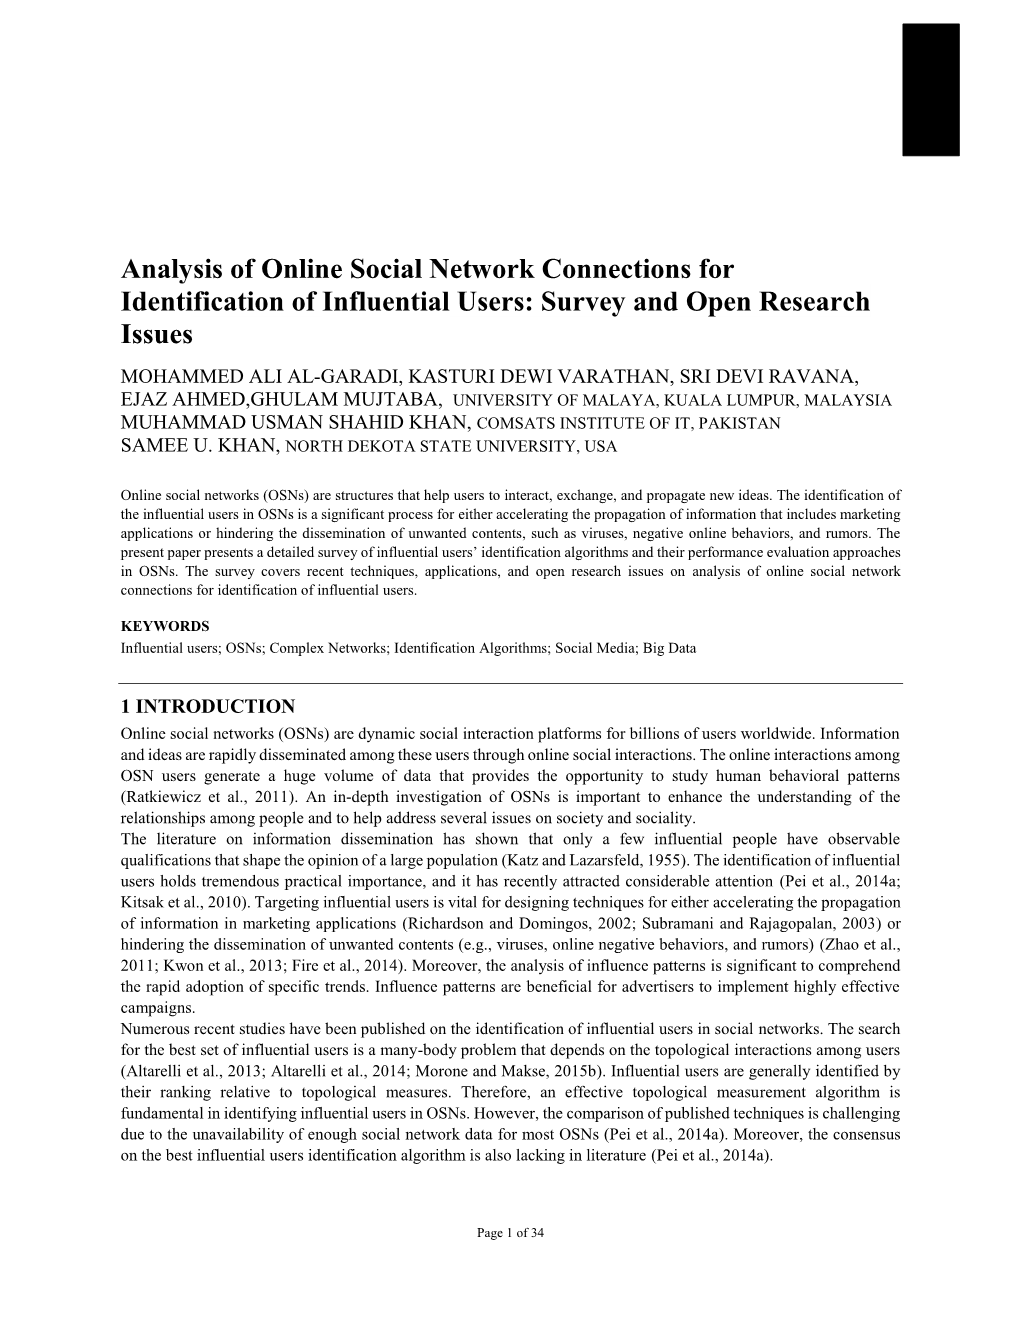 Analysis of Online Social Network Connections for Identification Of